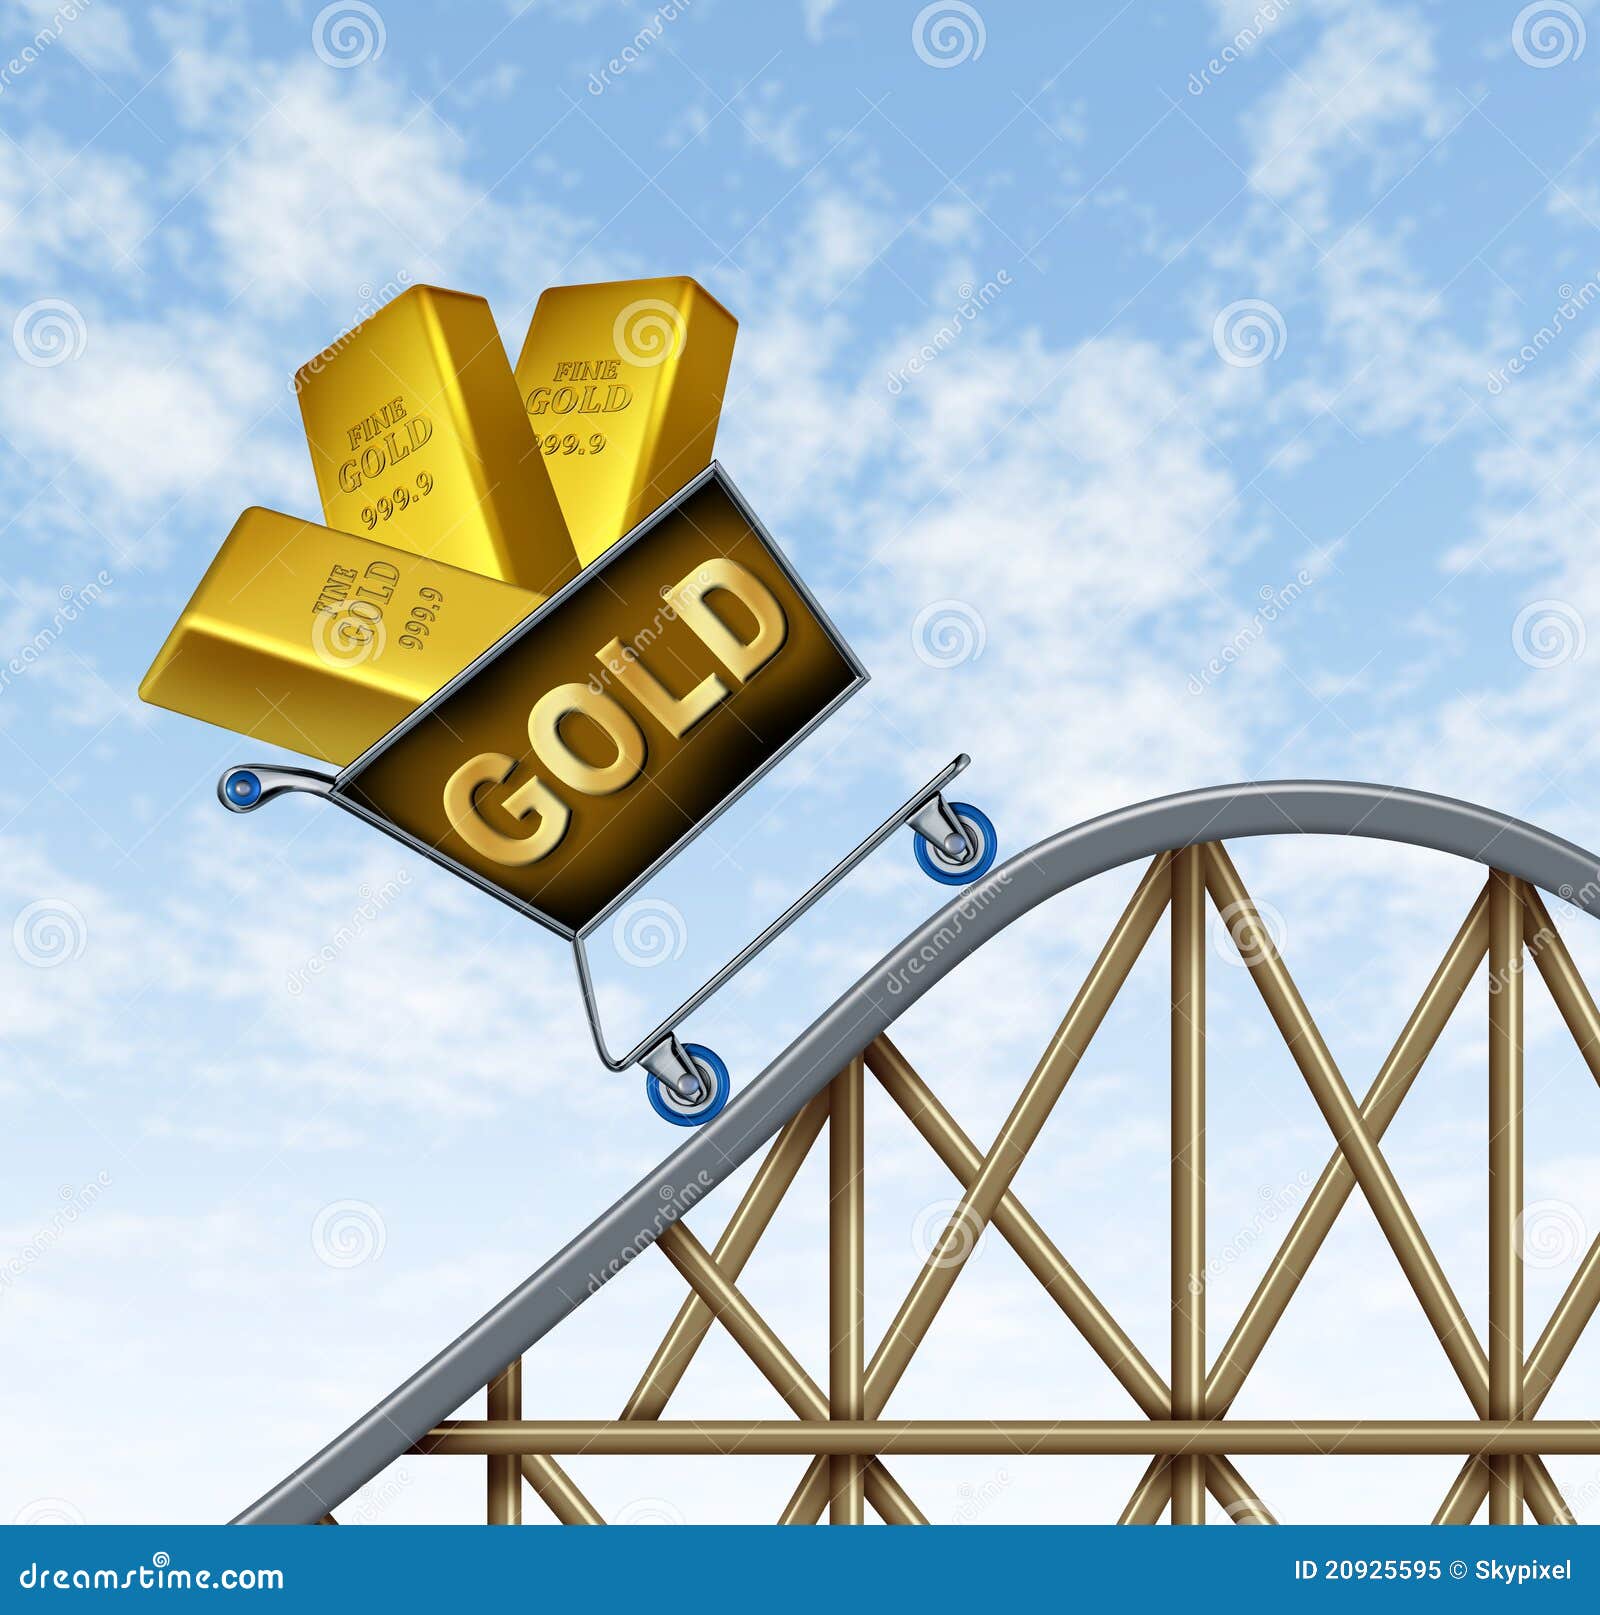 rising gold prices